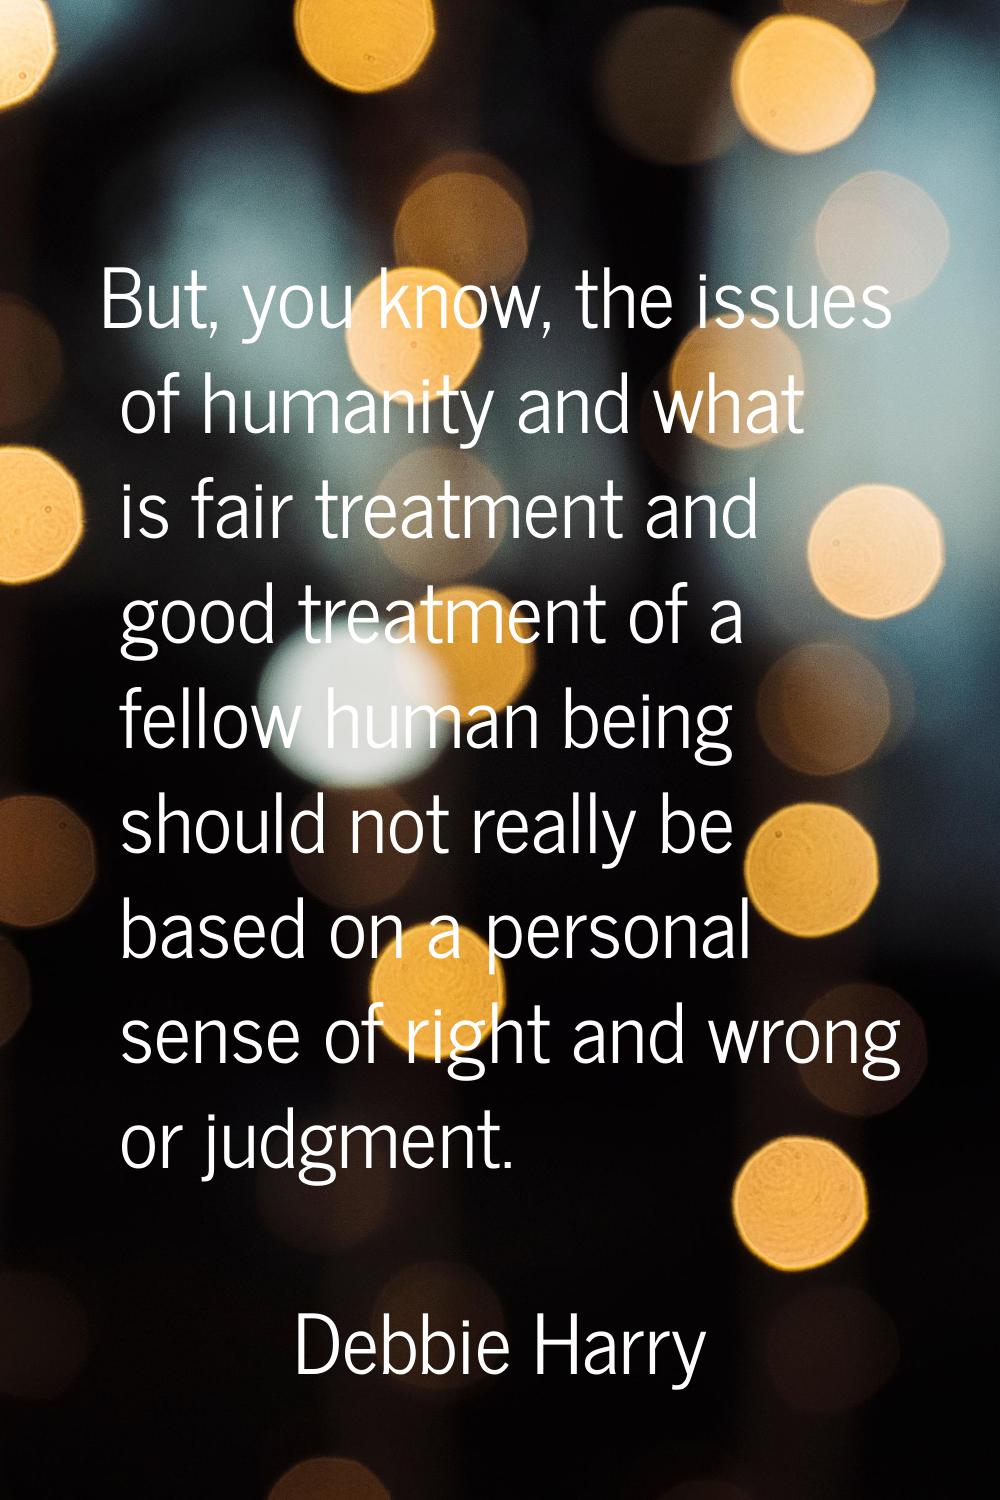 But, you know, the issues of humanity and what is fair treatment and good treatment of a fellow hum